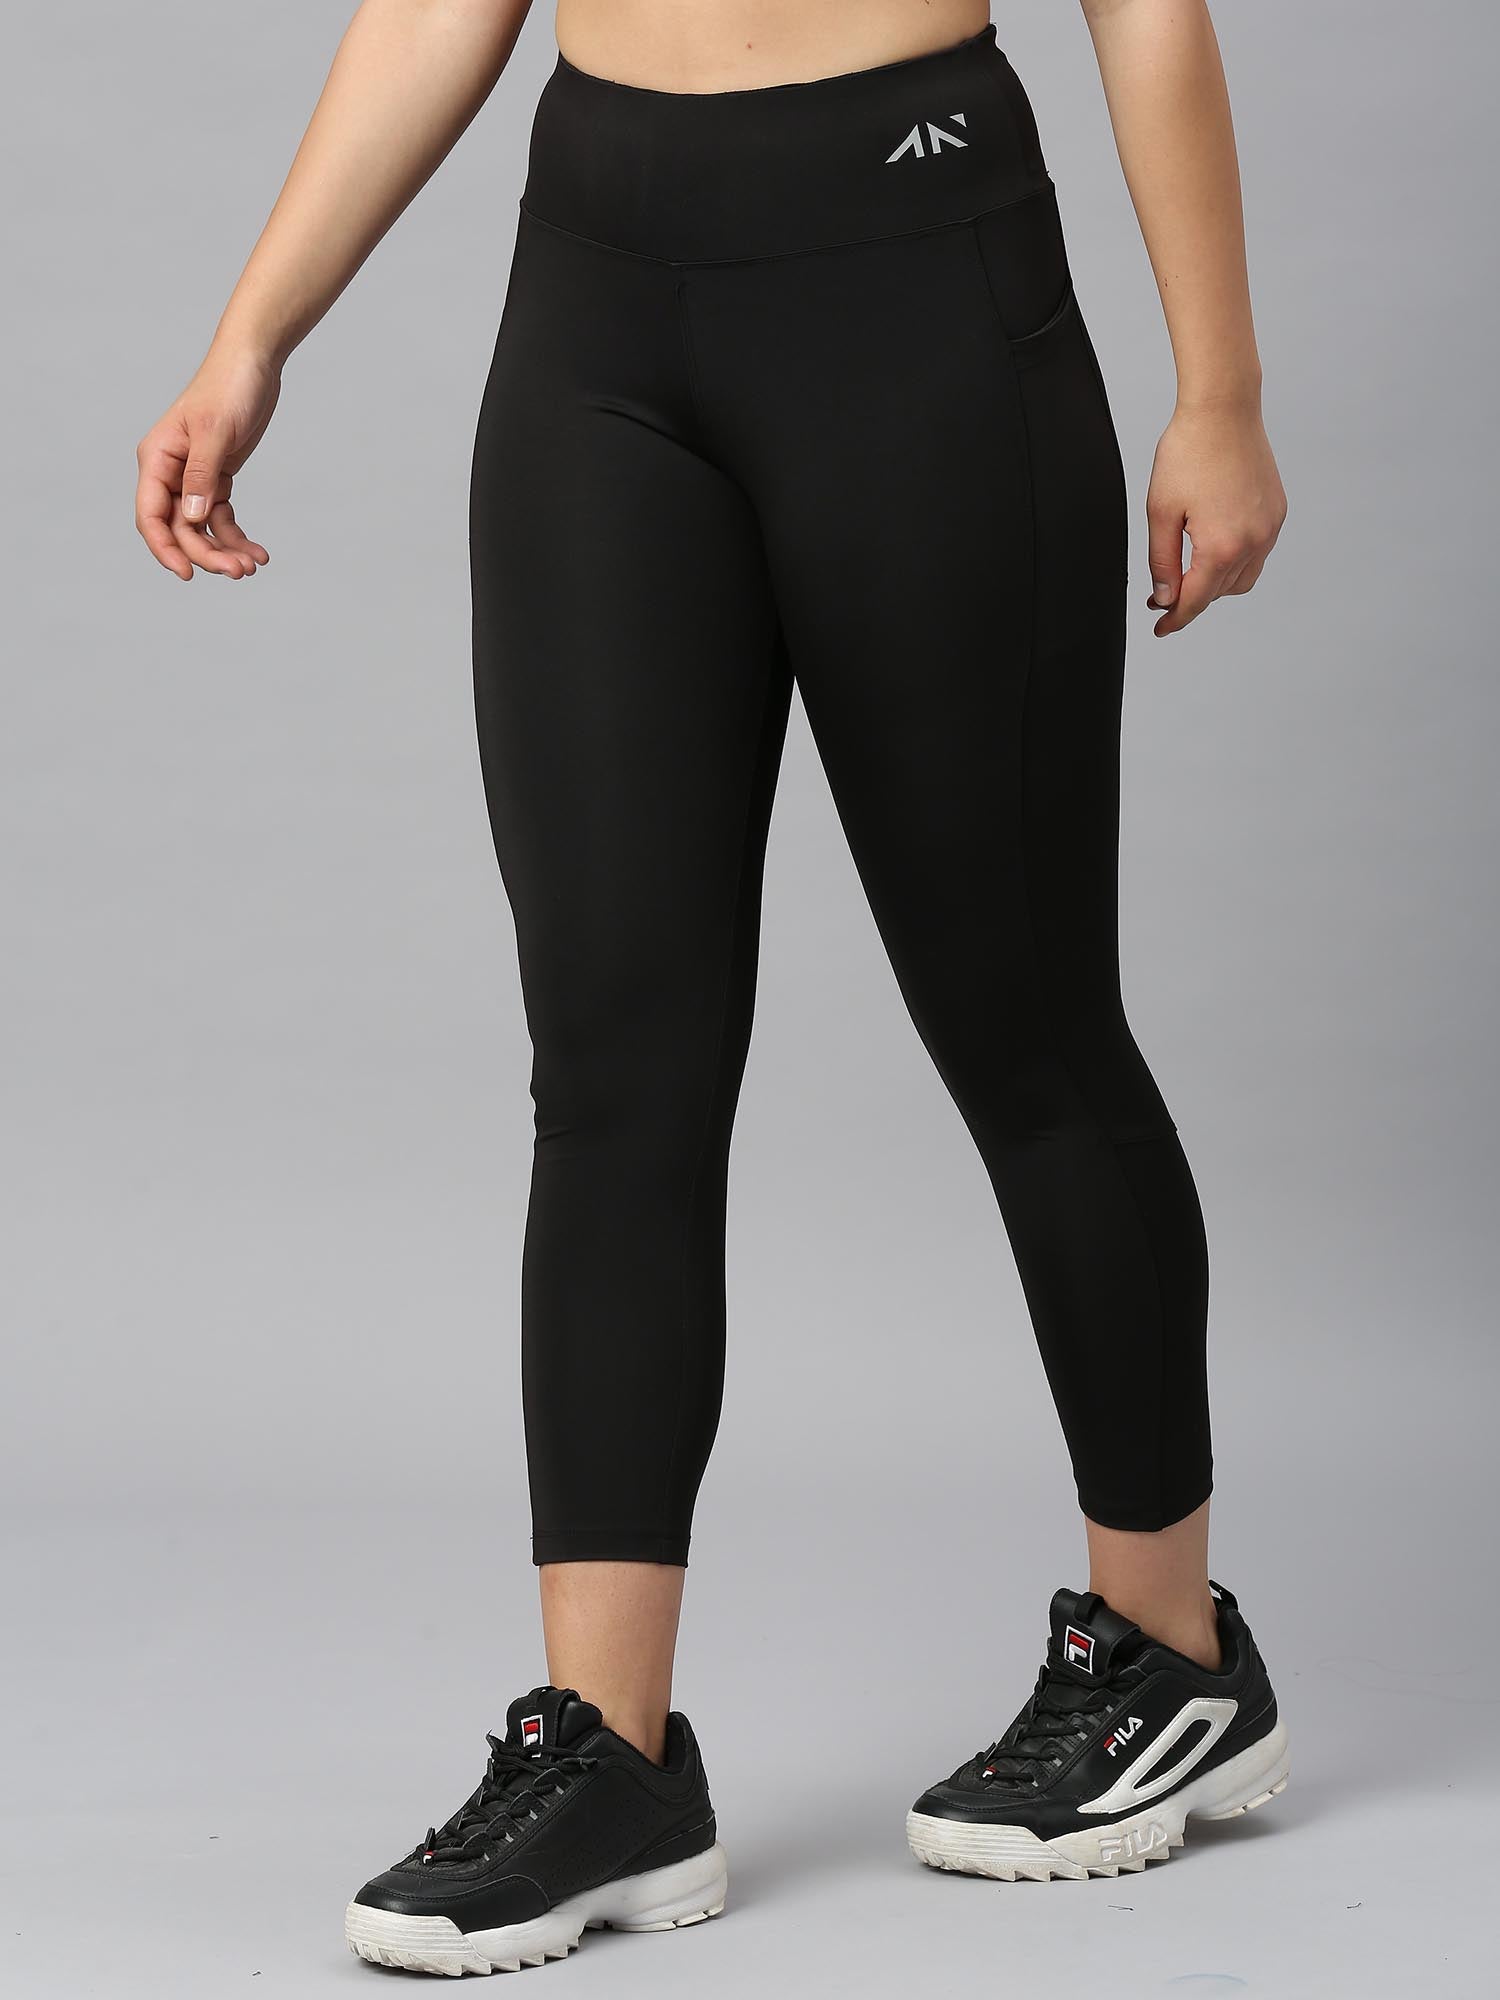 Buy GYMIFIC Gym wear Leggings Ankle Length Workout Pants with Phone Pockets  | Stretchable Tights | Mid Waist Sports Fitness Yoga Track Pants for Girls  Women Online In India At Discounted Prices